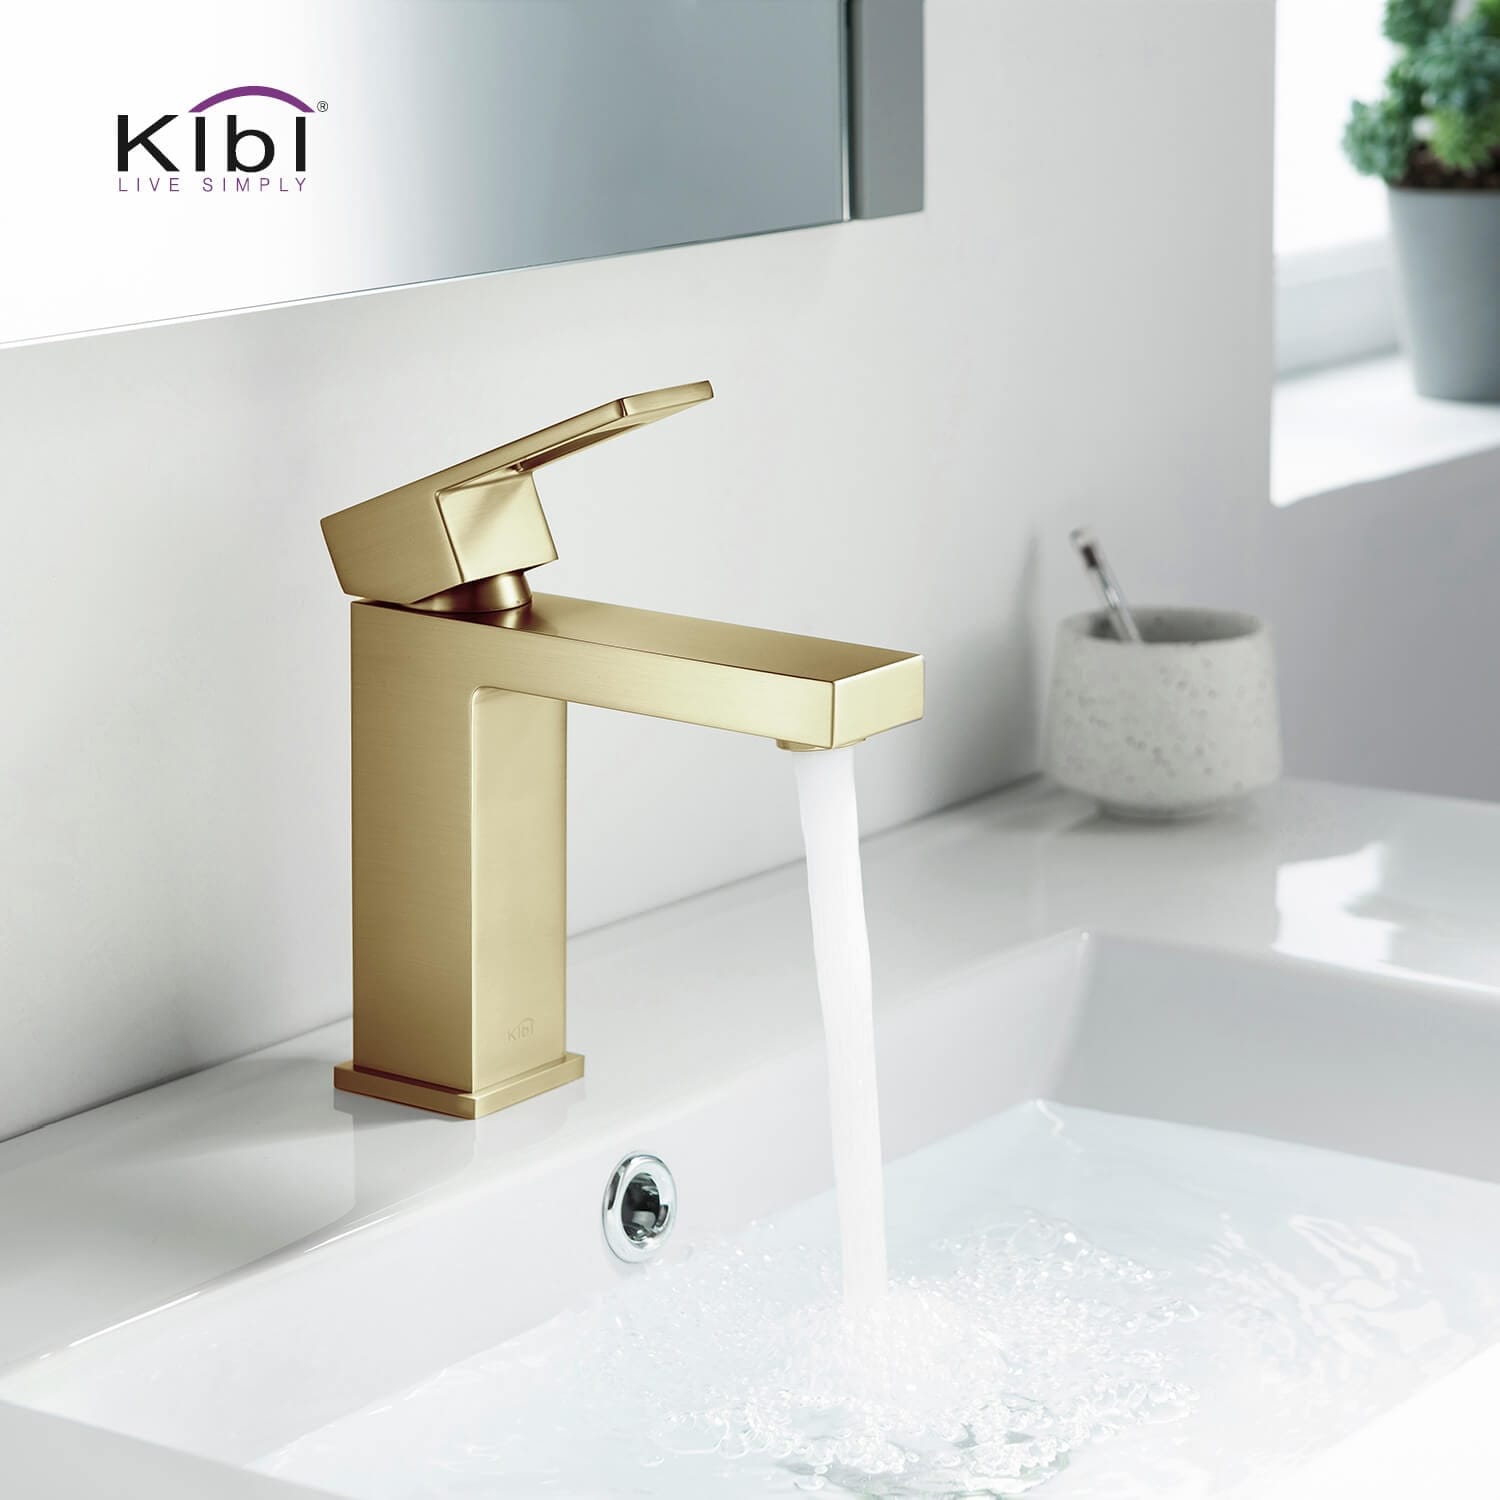 Short SOQO Bathroom Sink Single Faucet Brass Bamboo Shaped Oil Rubbed Bronze BathroomWater Tap 